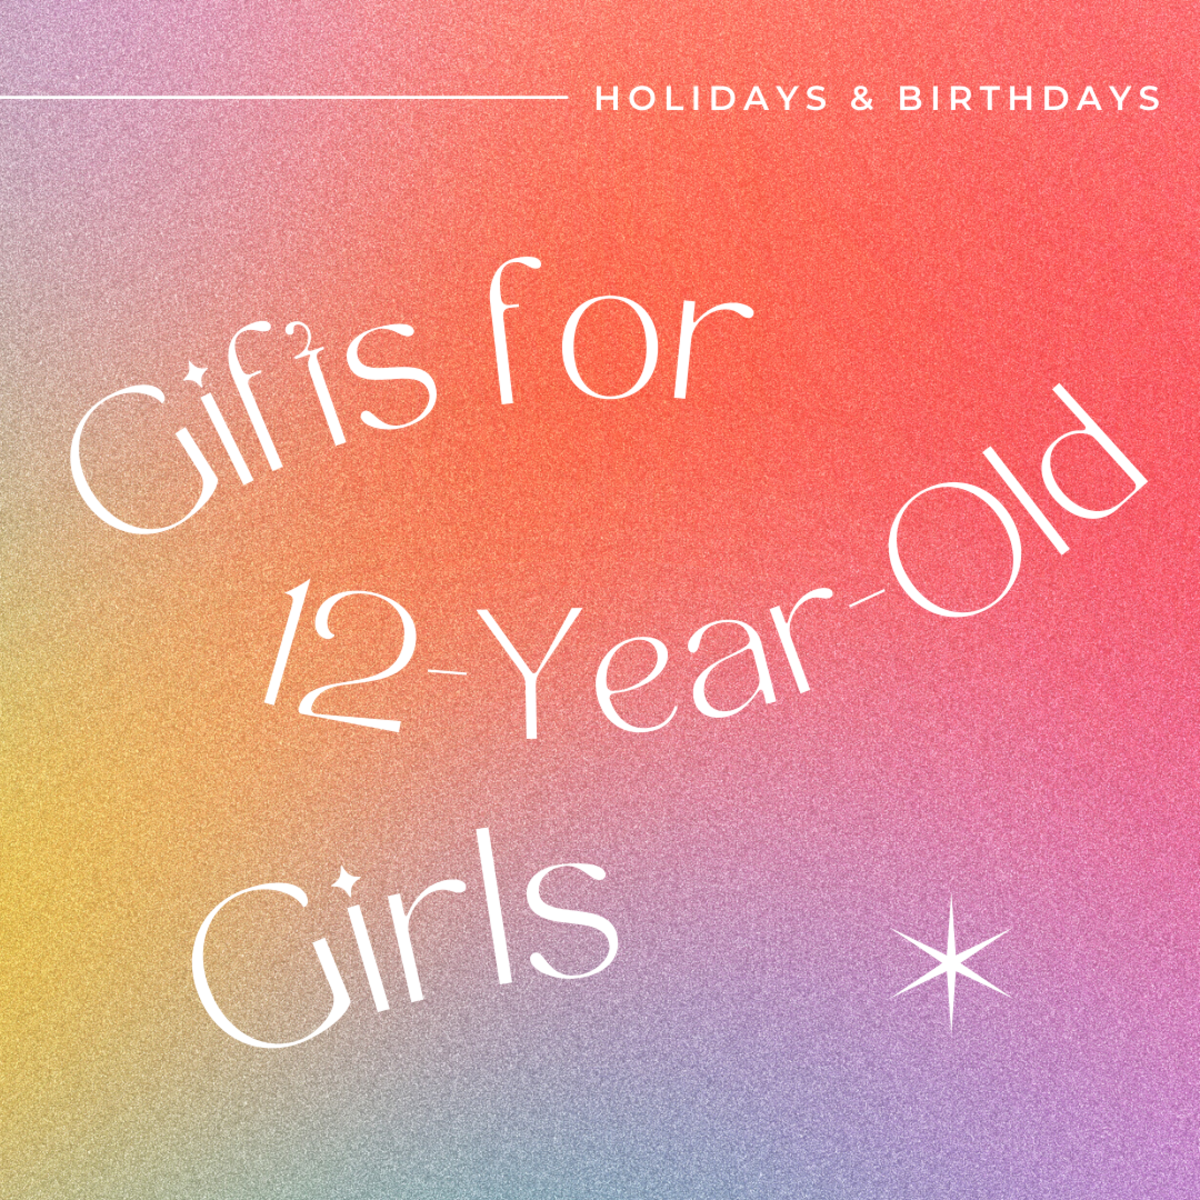 Best Gifts for 12-Year-Old Girls (Christmas, Birthday, Hanukkah, or Just Because) - Holidappy